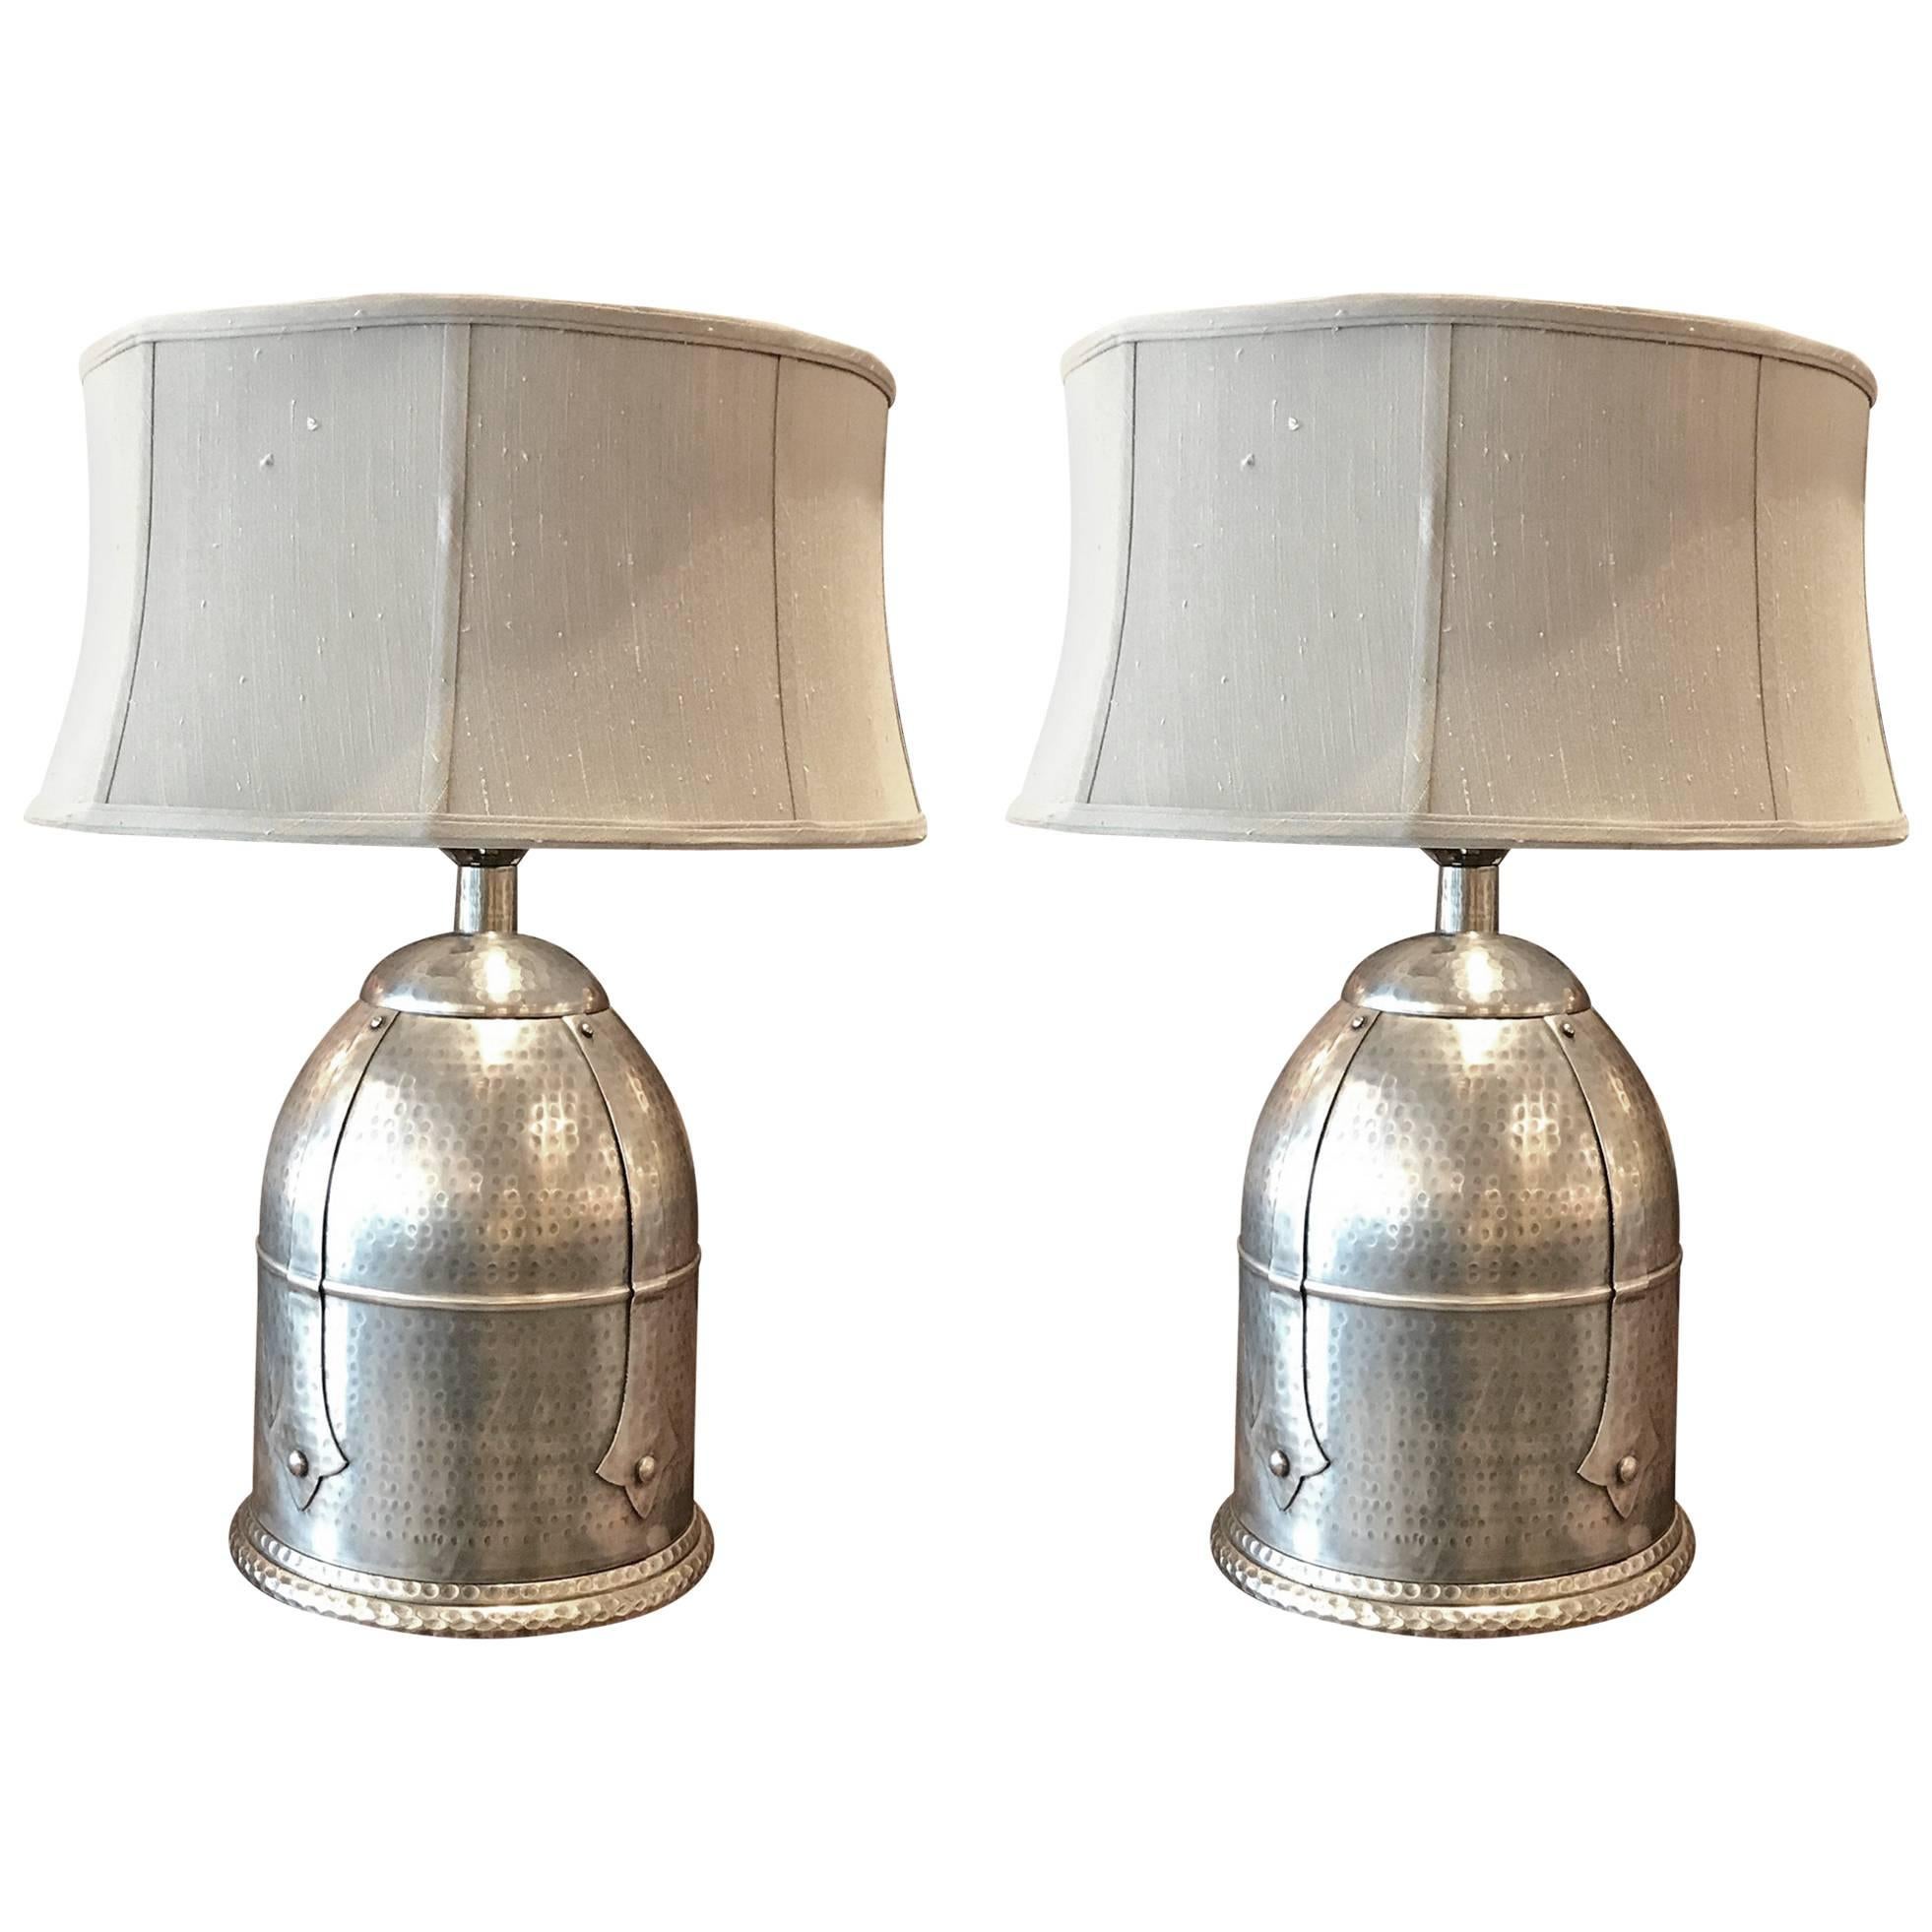 Pair of Silvered Metal Hand-Hammered Lamps